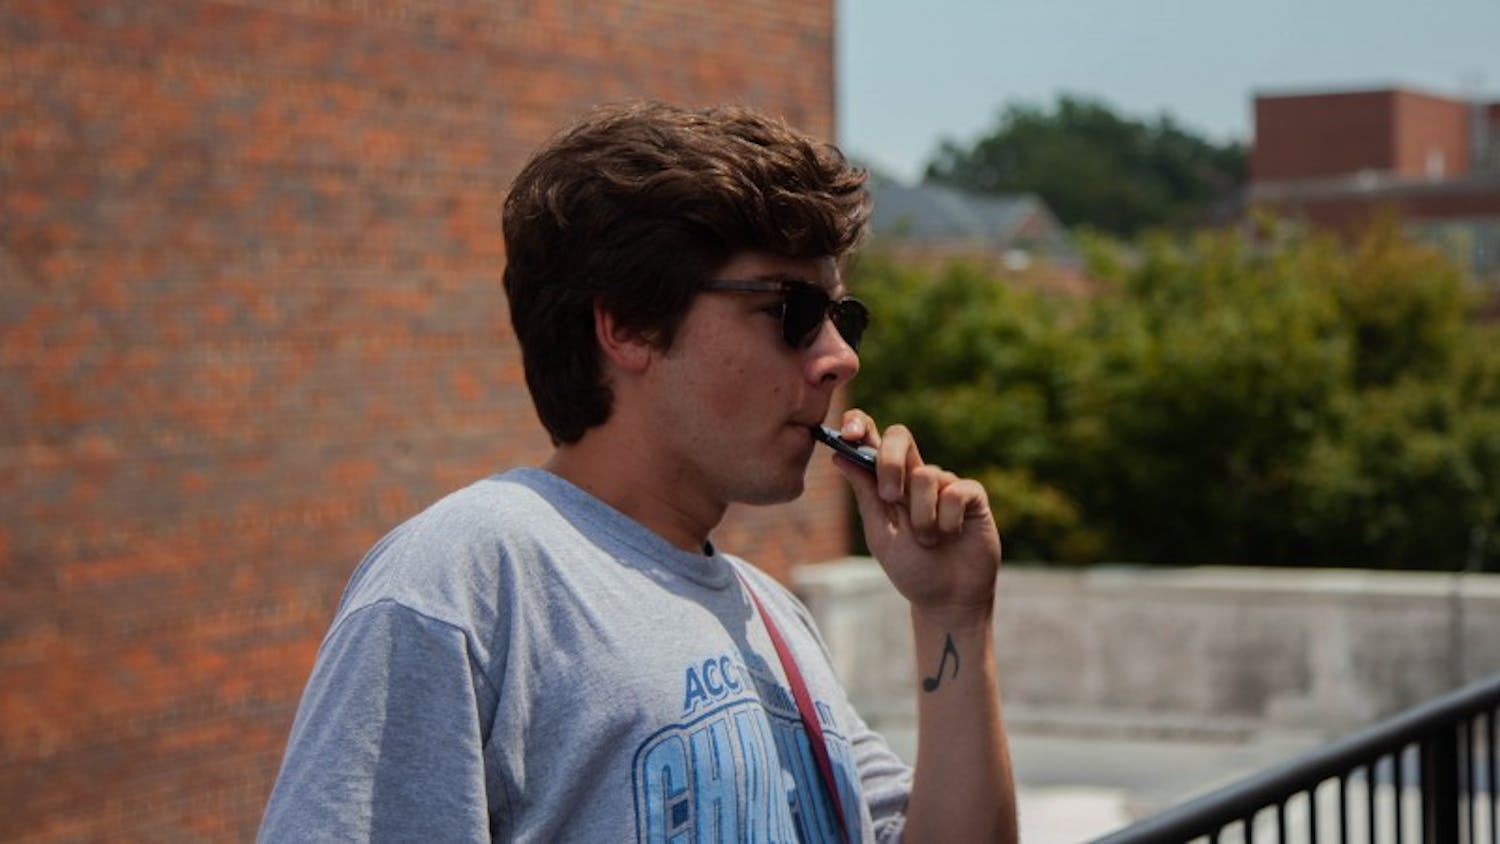 Vaping on Roof